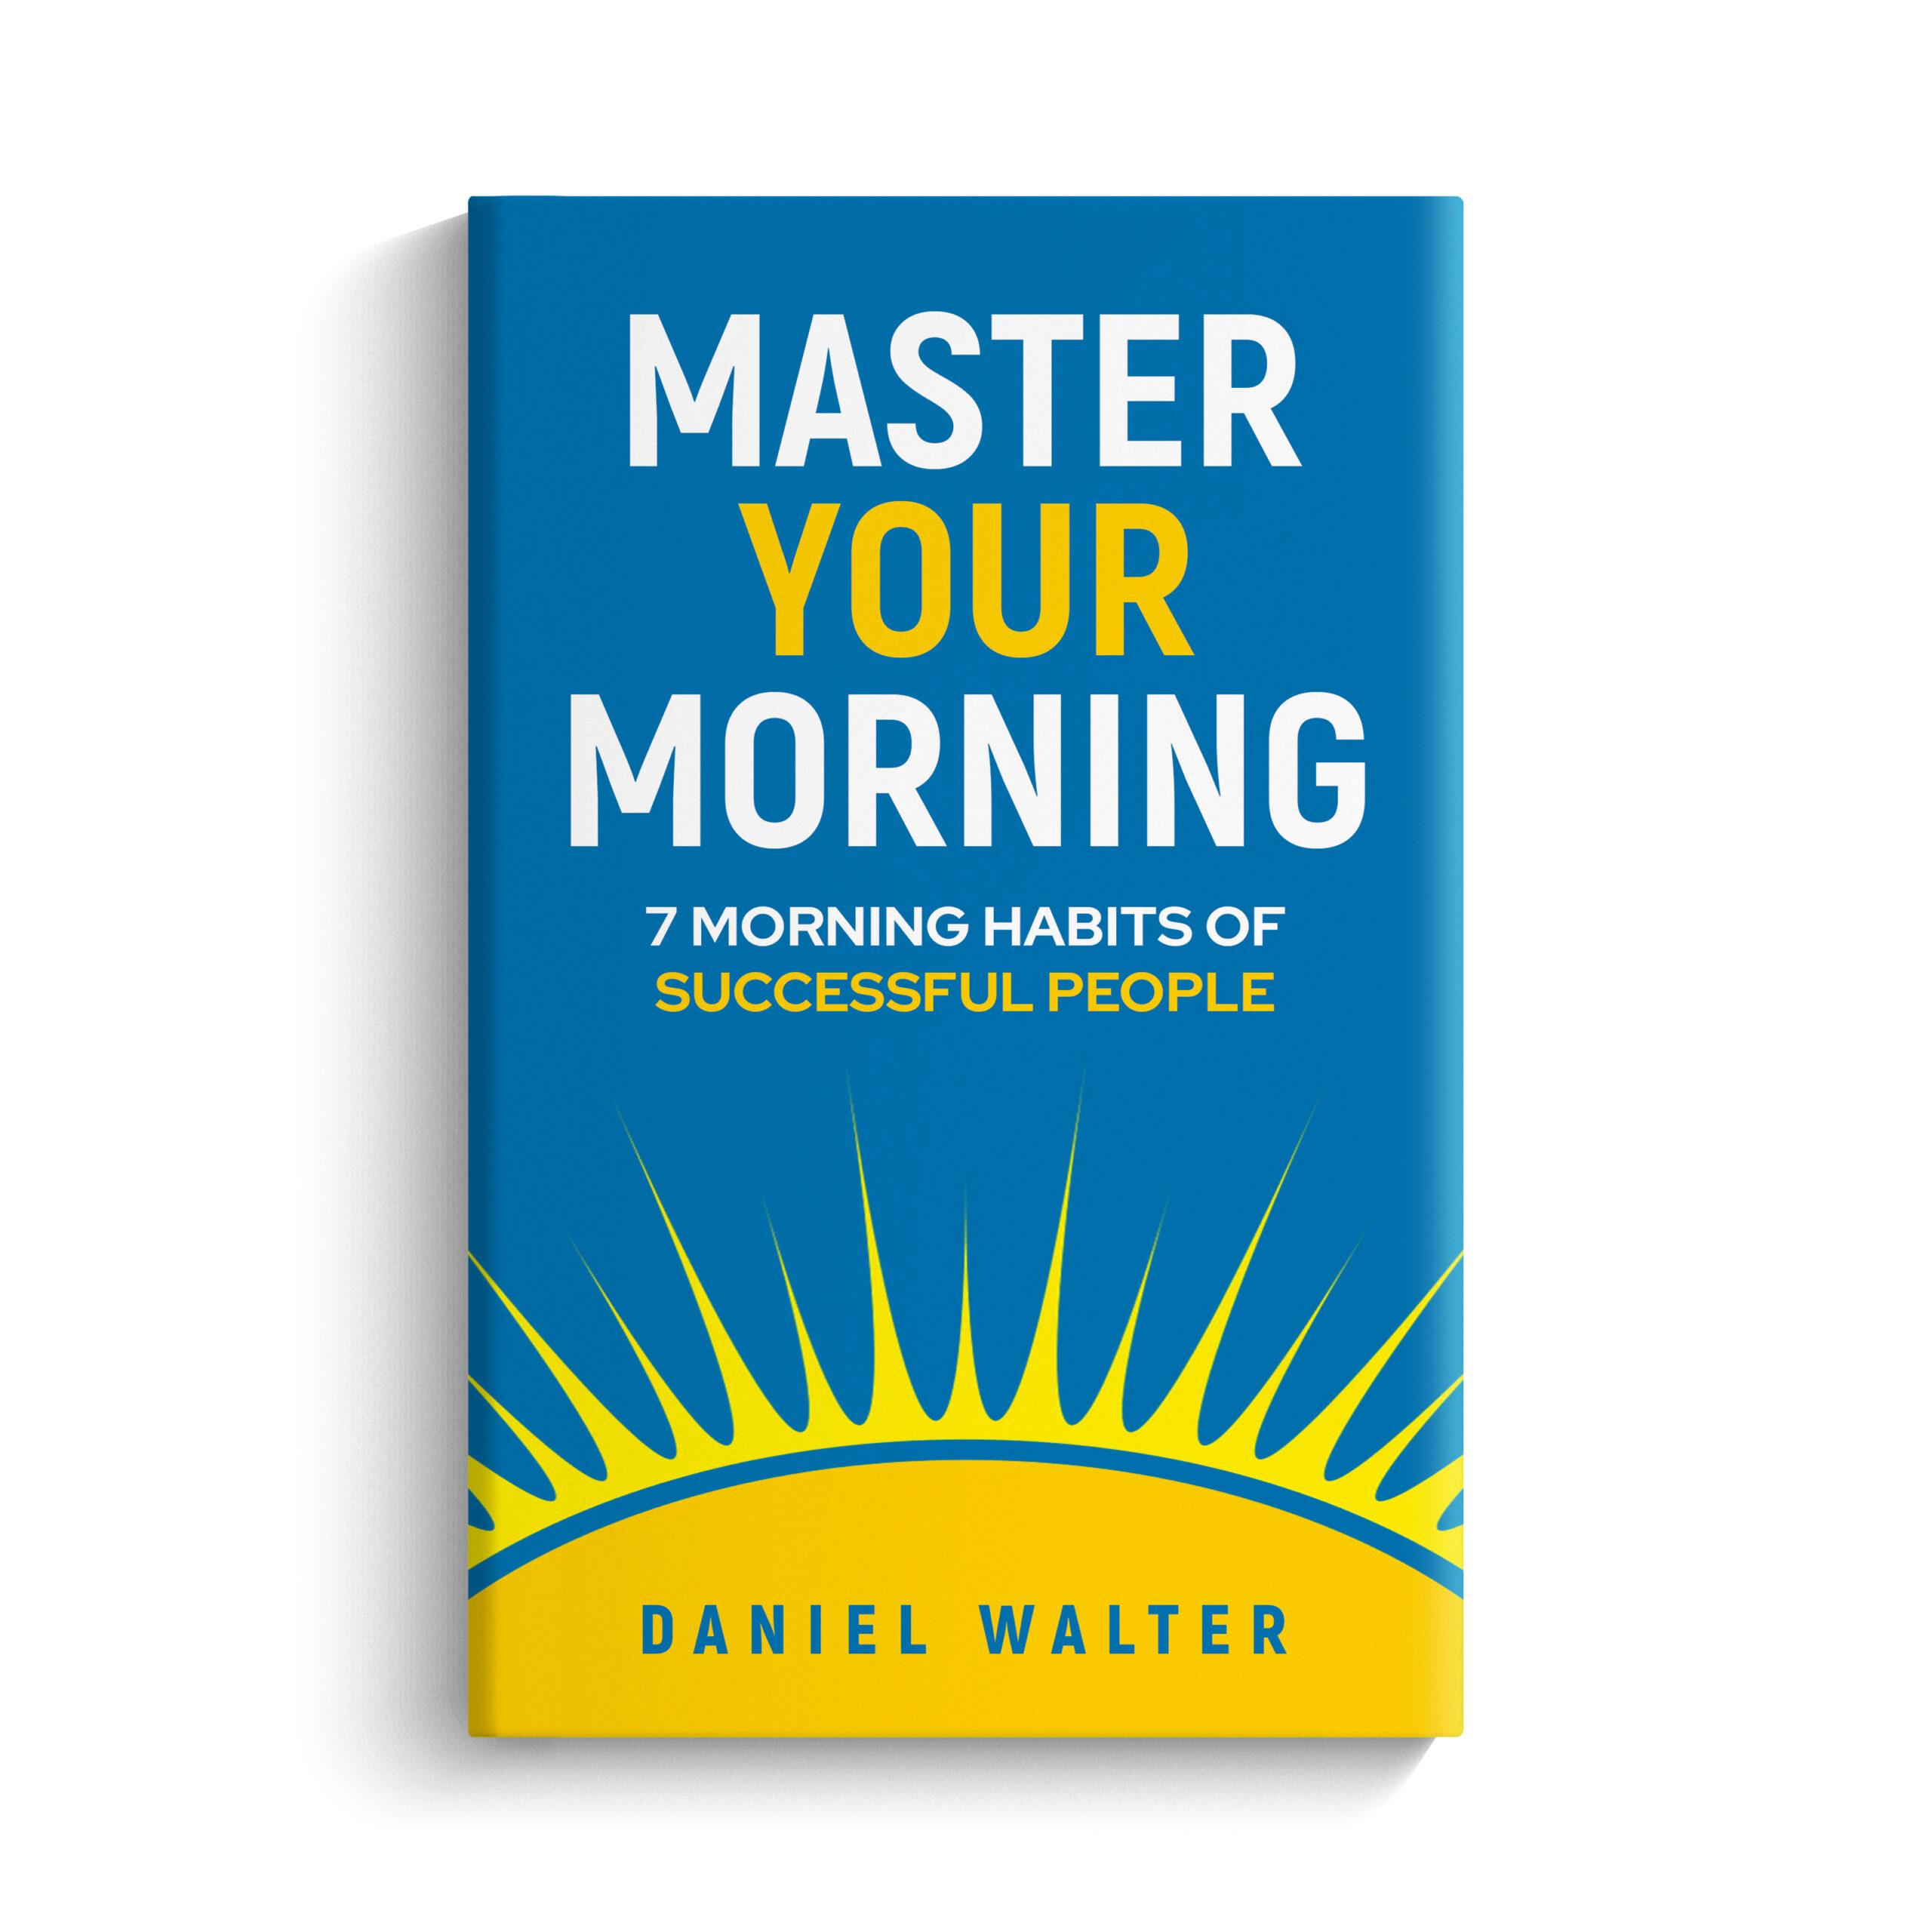 Master Your Morning by Daniel Walter